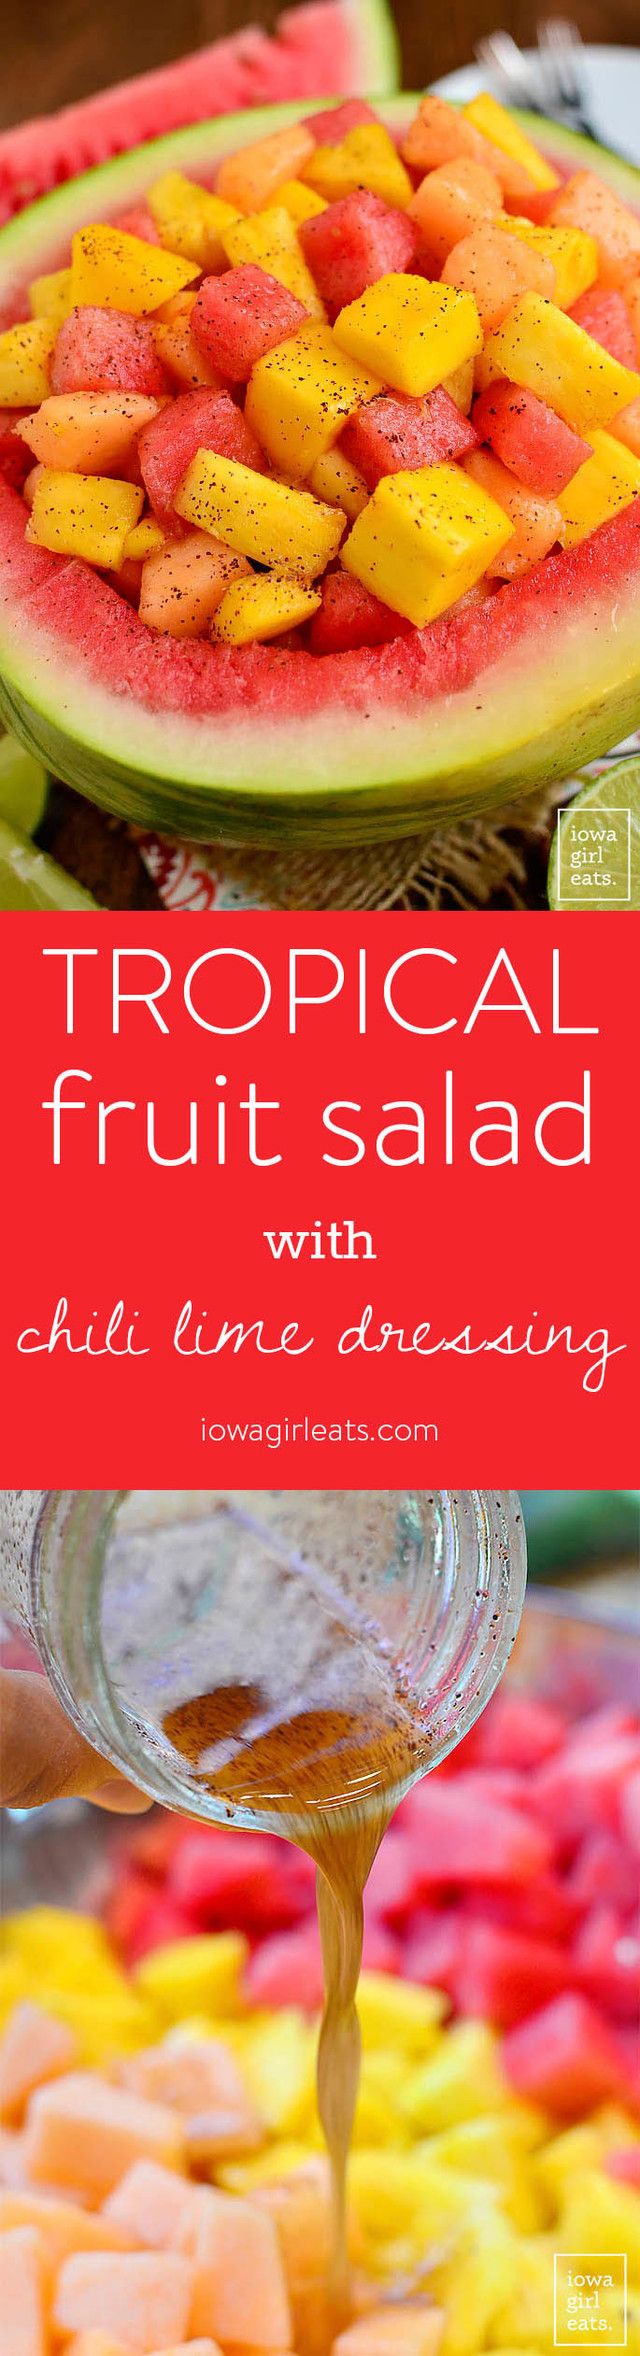 1472536162 tropical fruit salad with chili lime dressing iowagirleats vertical